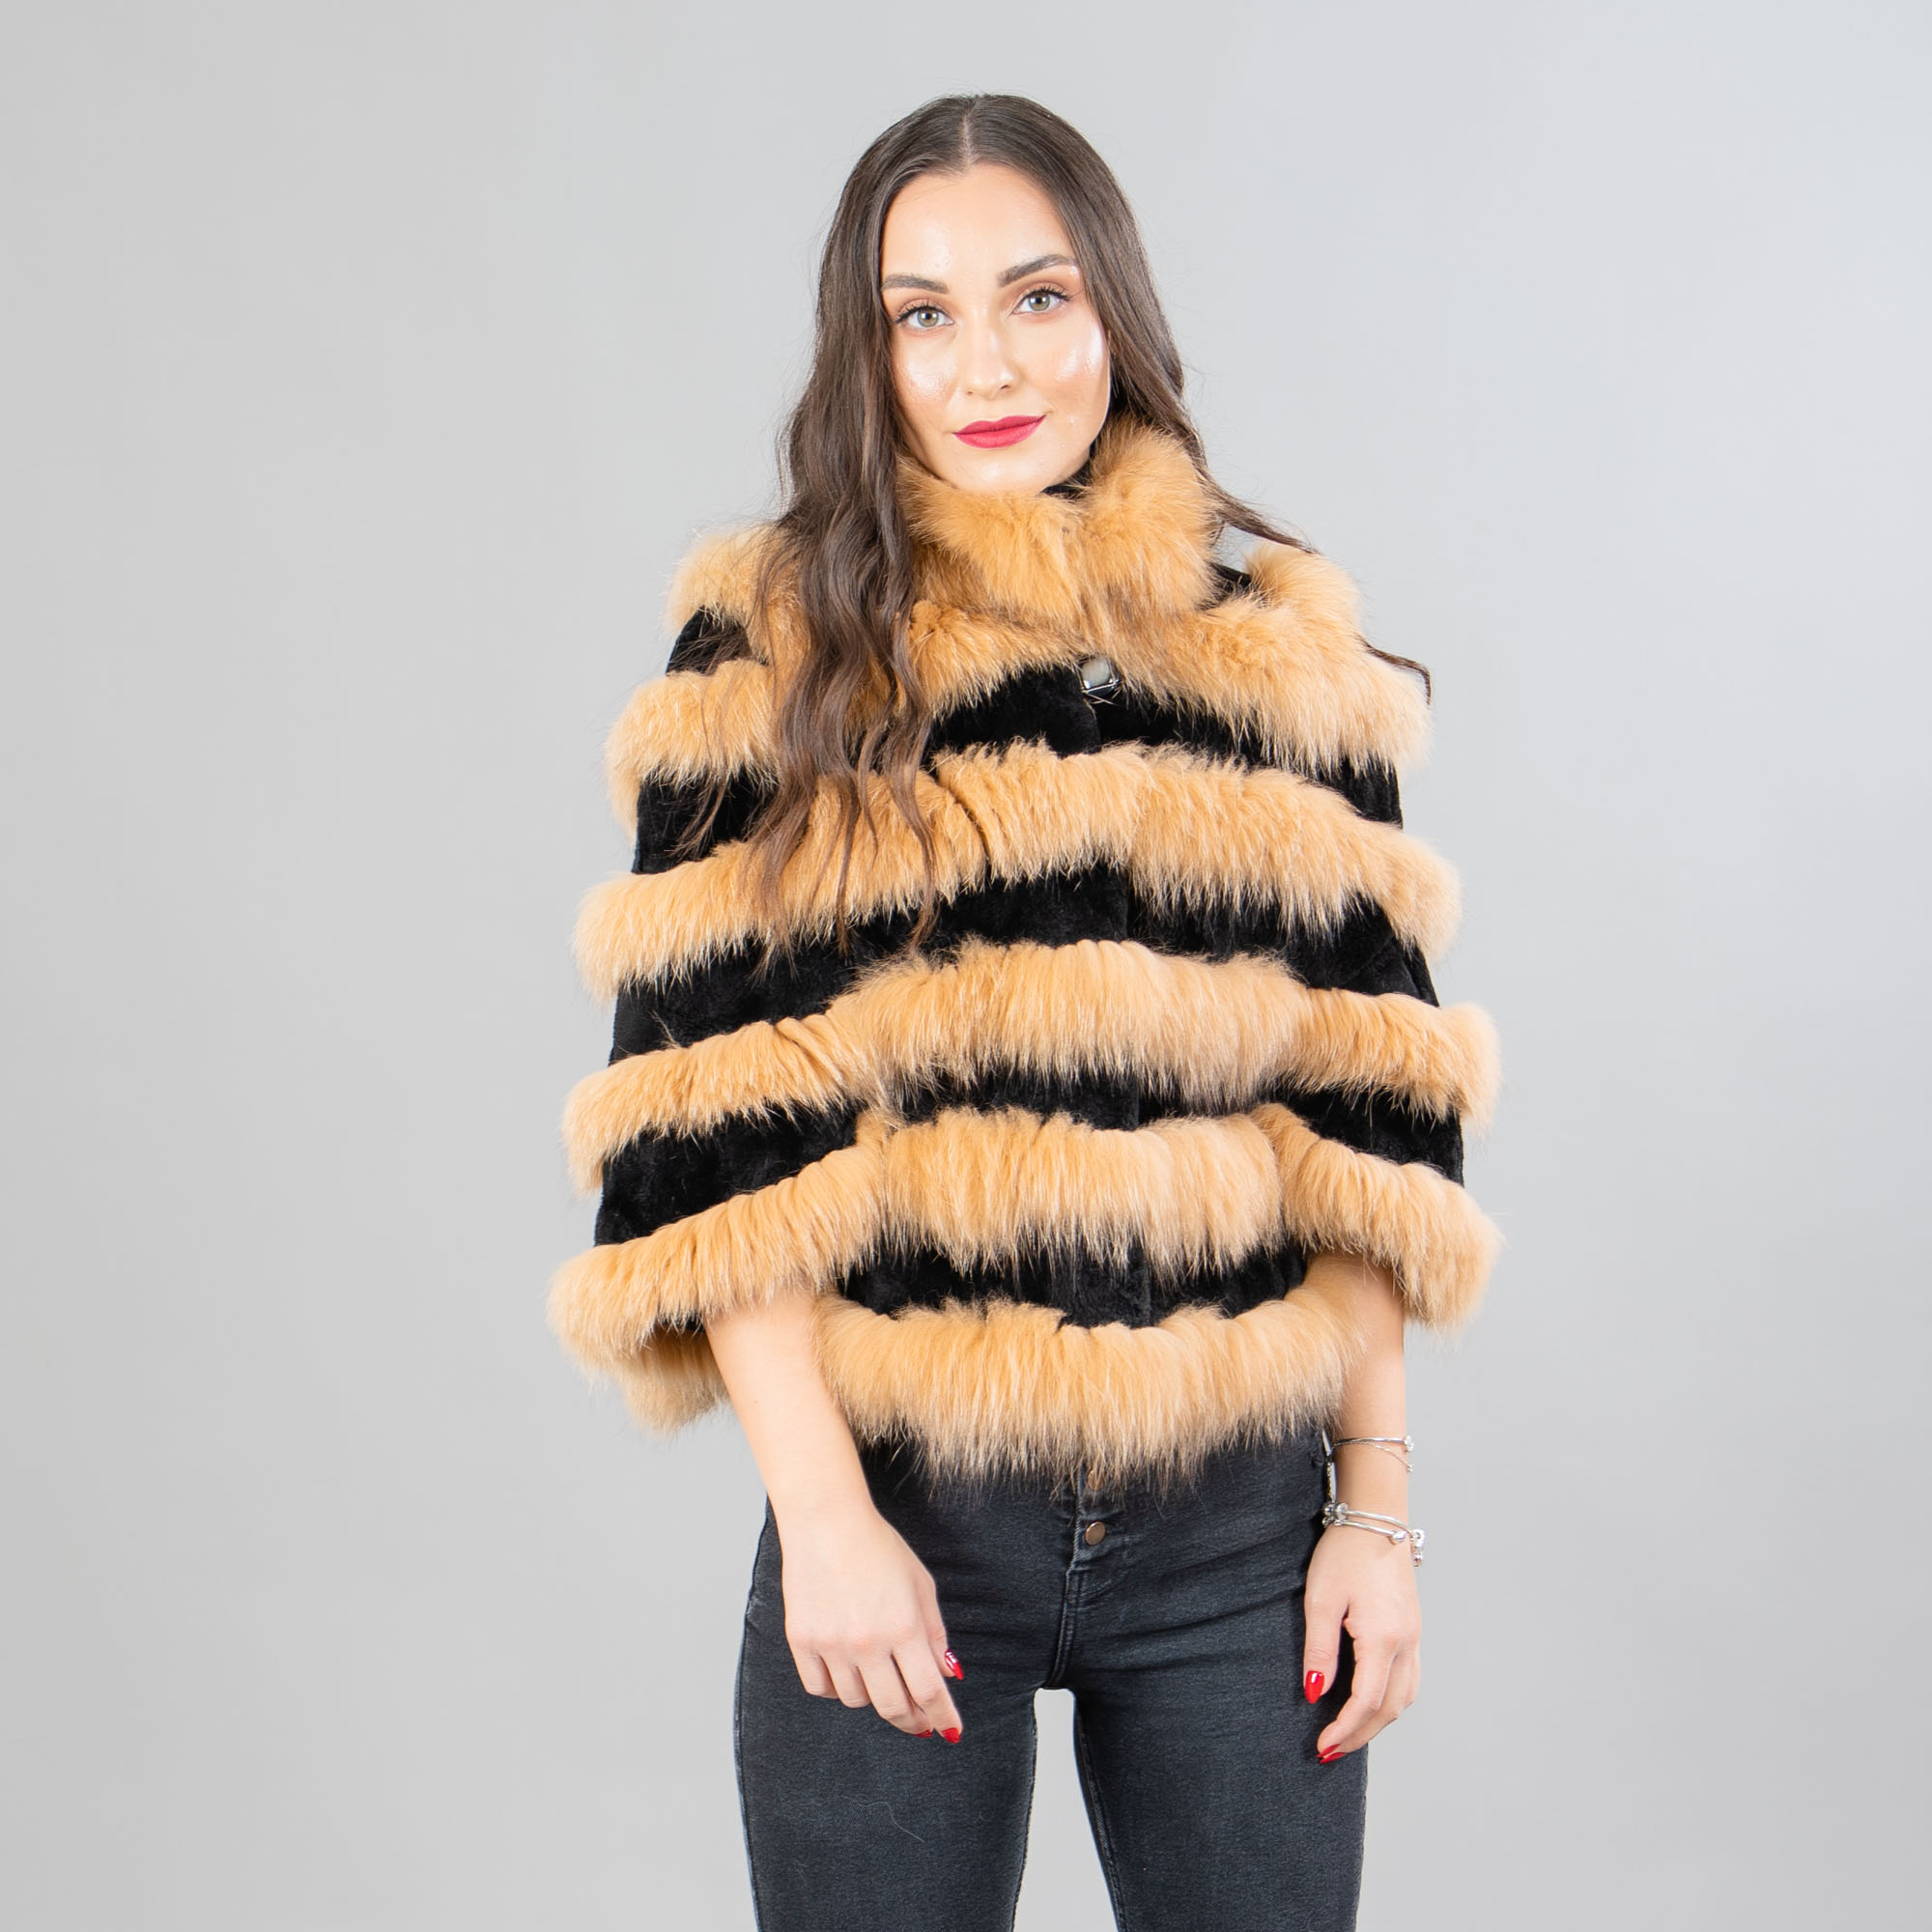 Fox fur cape with rabbit fur details in gold and black color